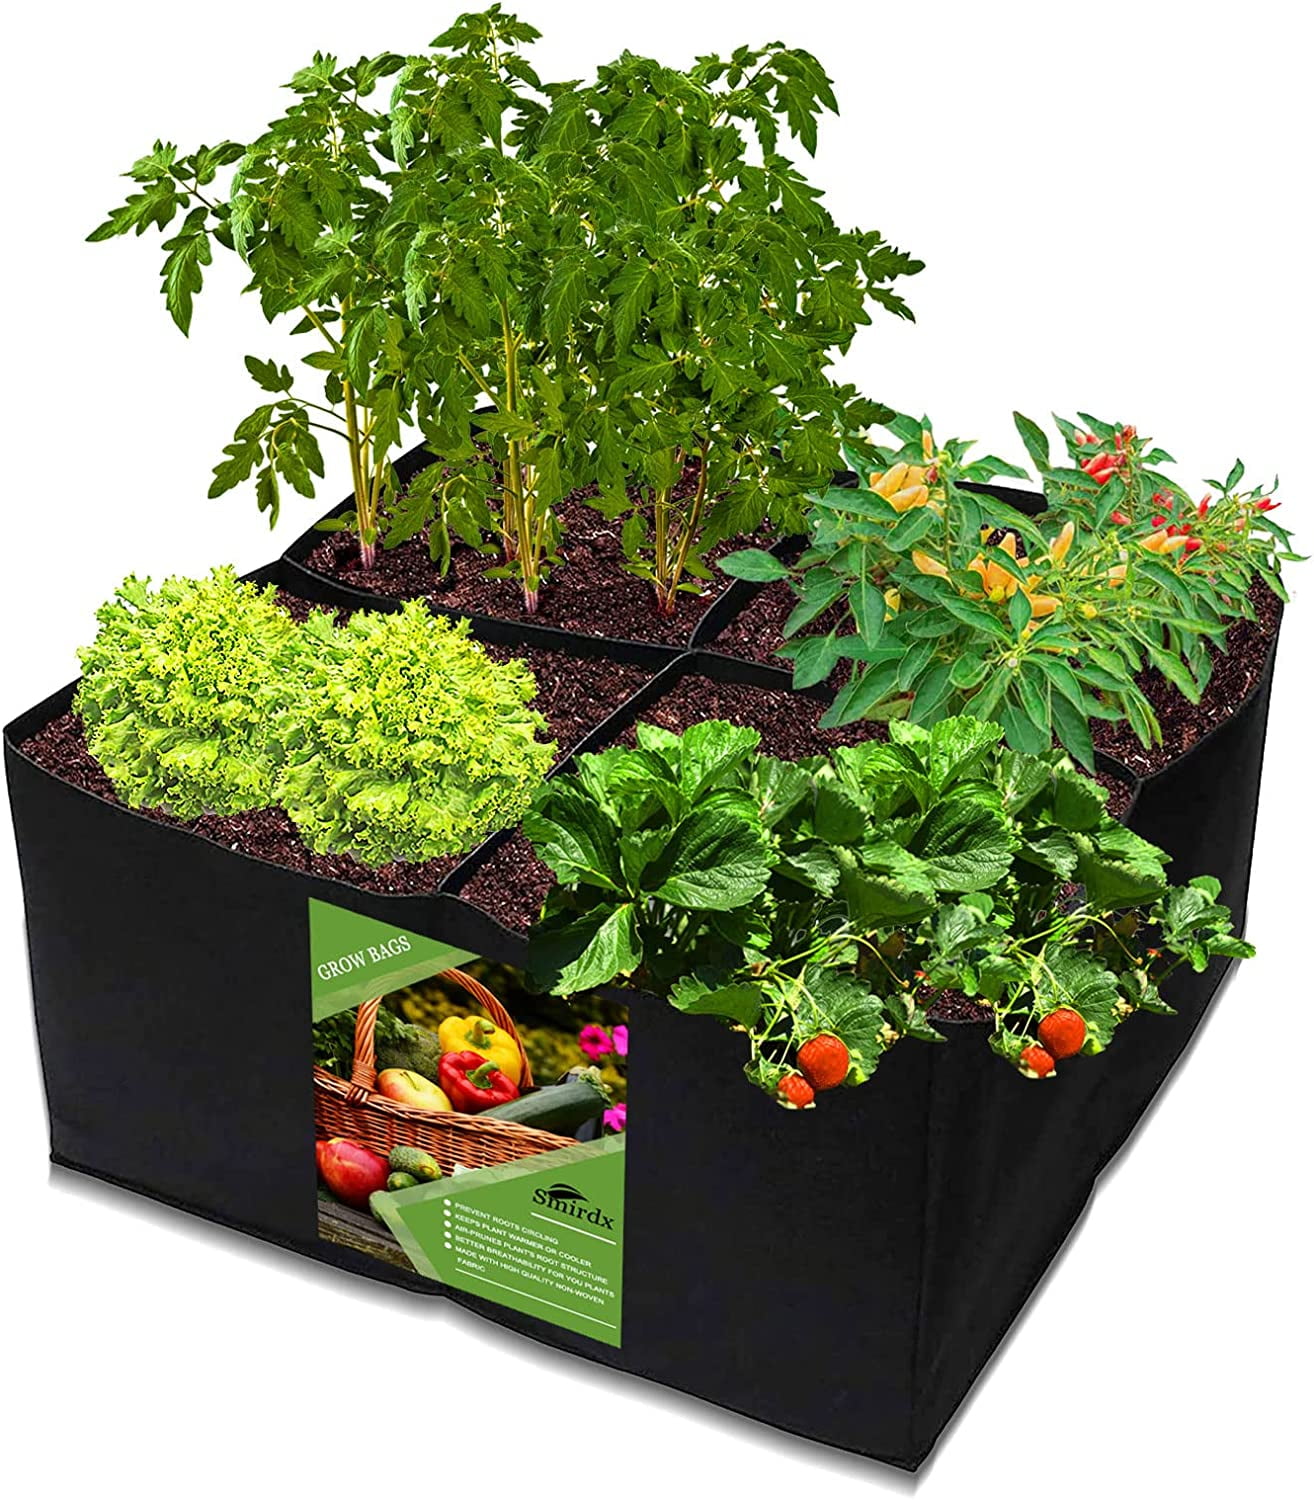 Bulk Buy China Wholesale Grow Bags Non-woven Fabric Raised Garden Bed  Rectangle Planting Grow Bags Fabric Planter Pot $0.35 from Fujian U Know  Supply Management Co., Ltd | Globalsources.com